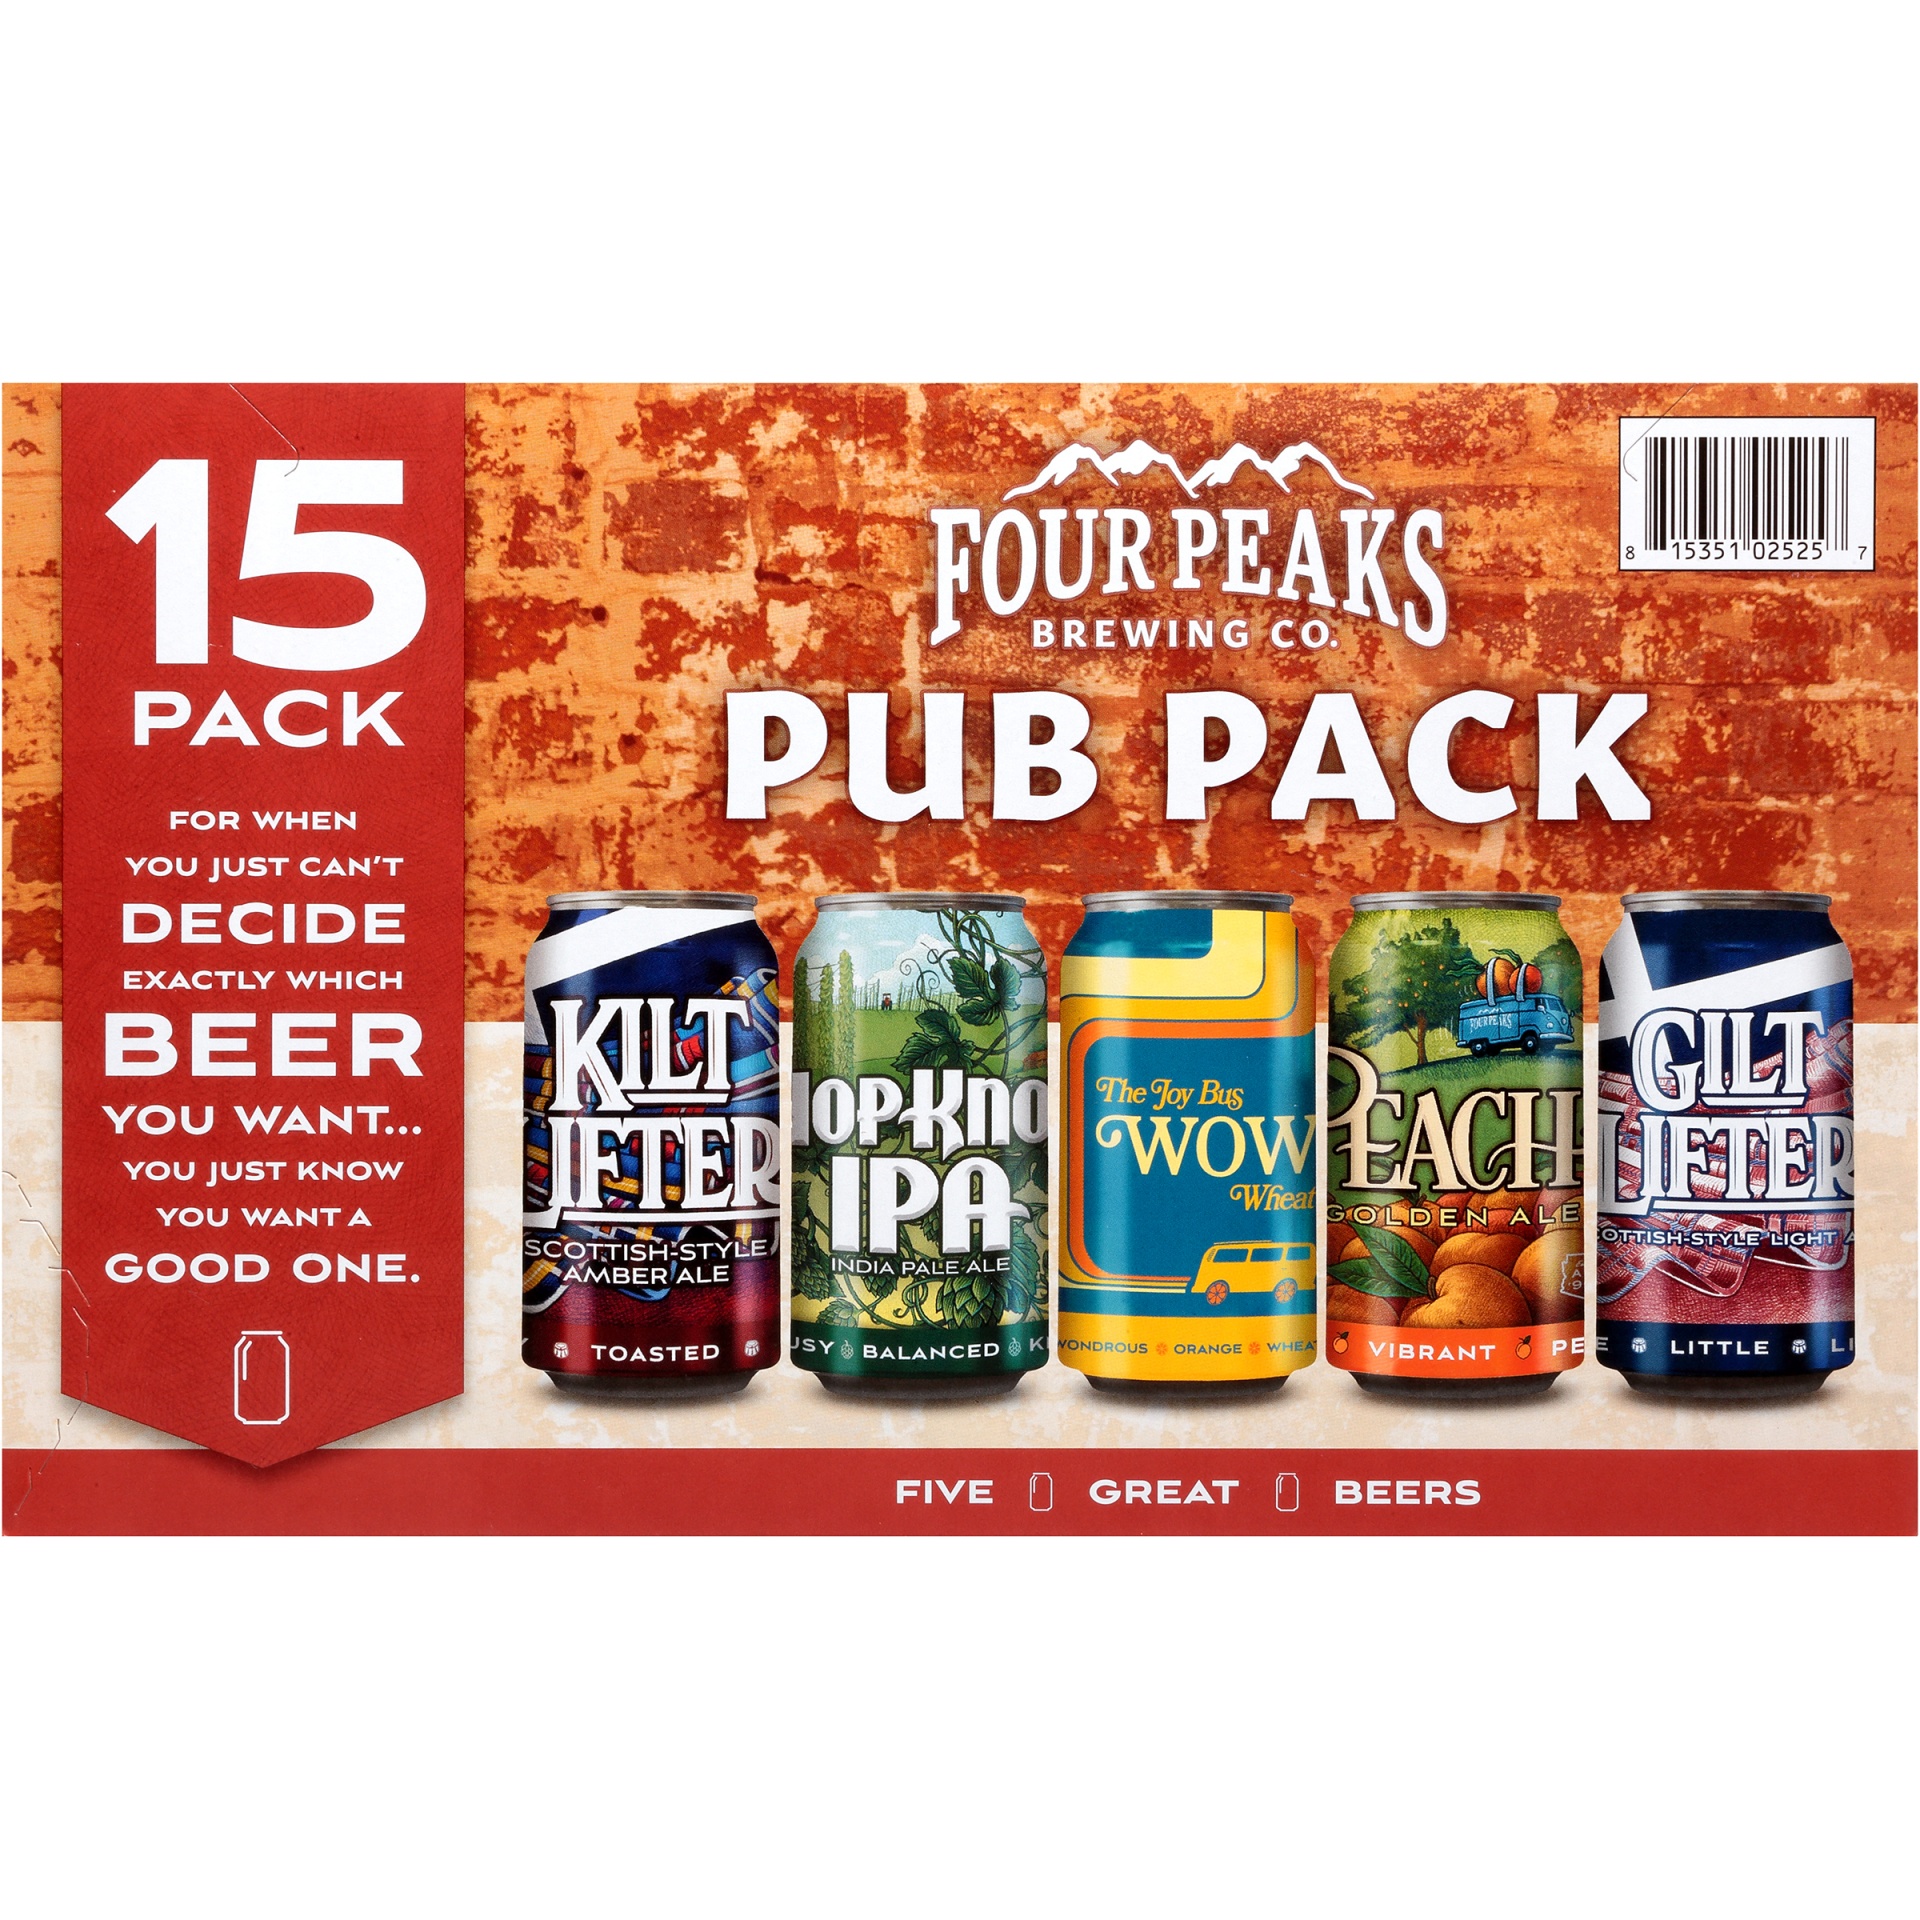 slide 1 of 1, Four Peaks Brewing Co. Kilt Lifter, Hop Knot IPA, The Joy Bus Wow Wheat Ale, Peach Golden Ale & Gilt Lifter Variety Pub Pack, 15 ct; 12 oz